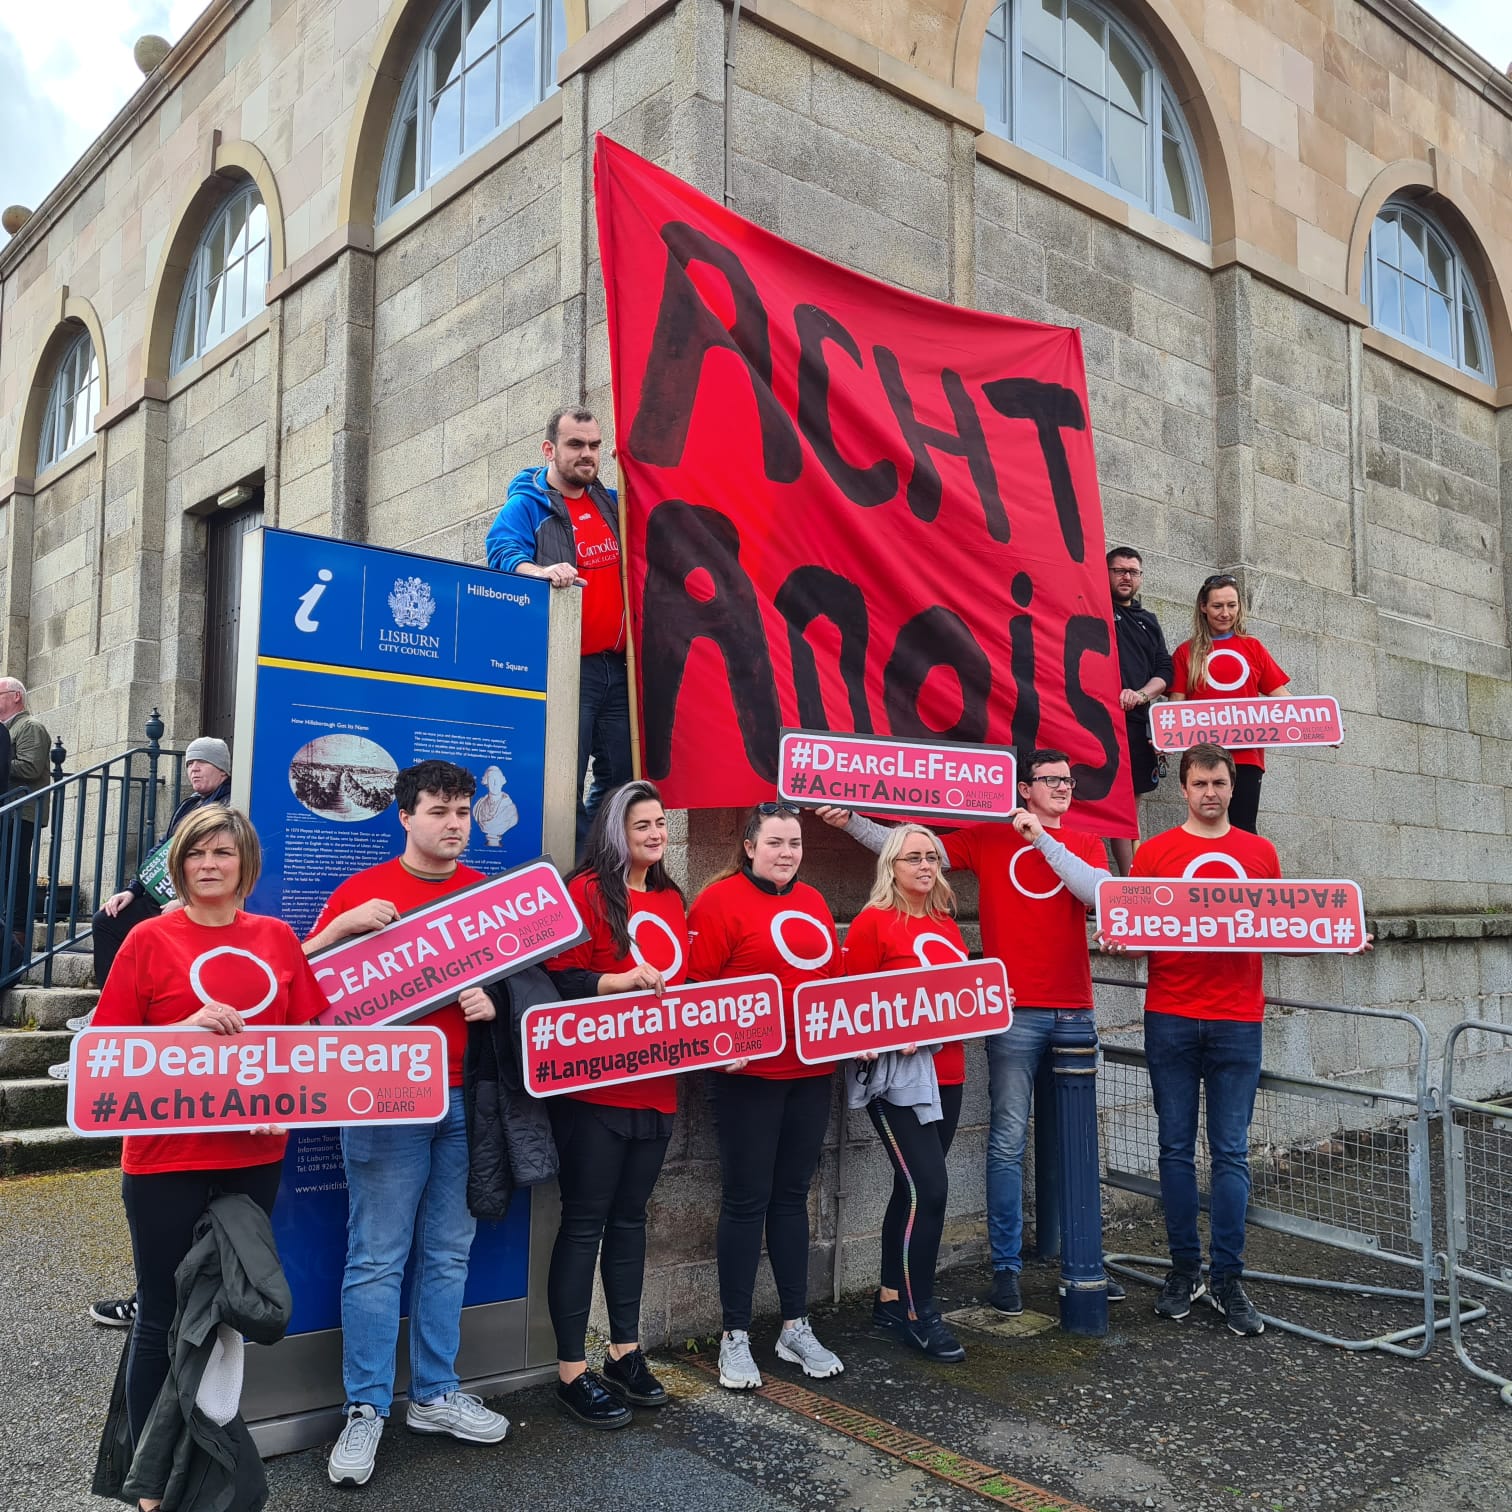 ACHT ANOIS: The Irish language community will march for its rights this Saturday